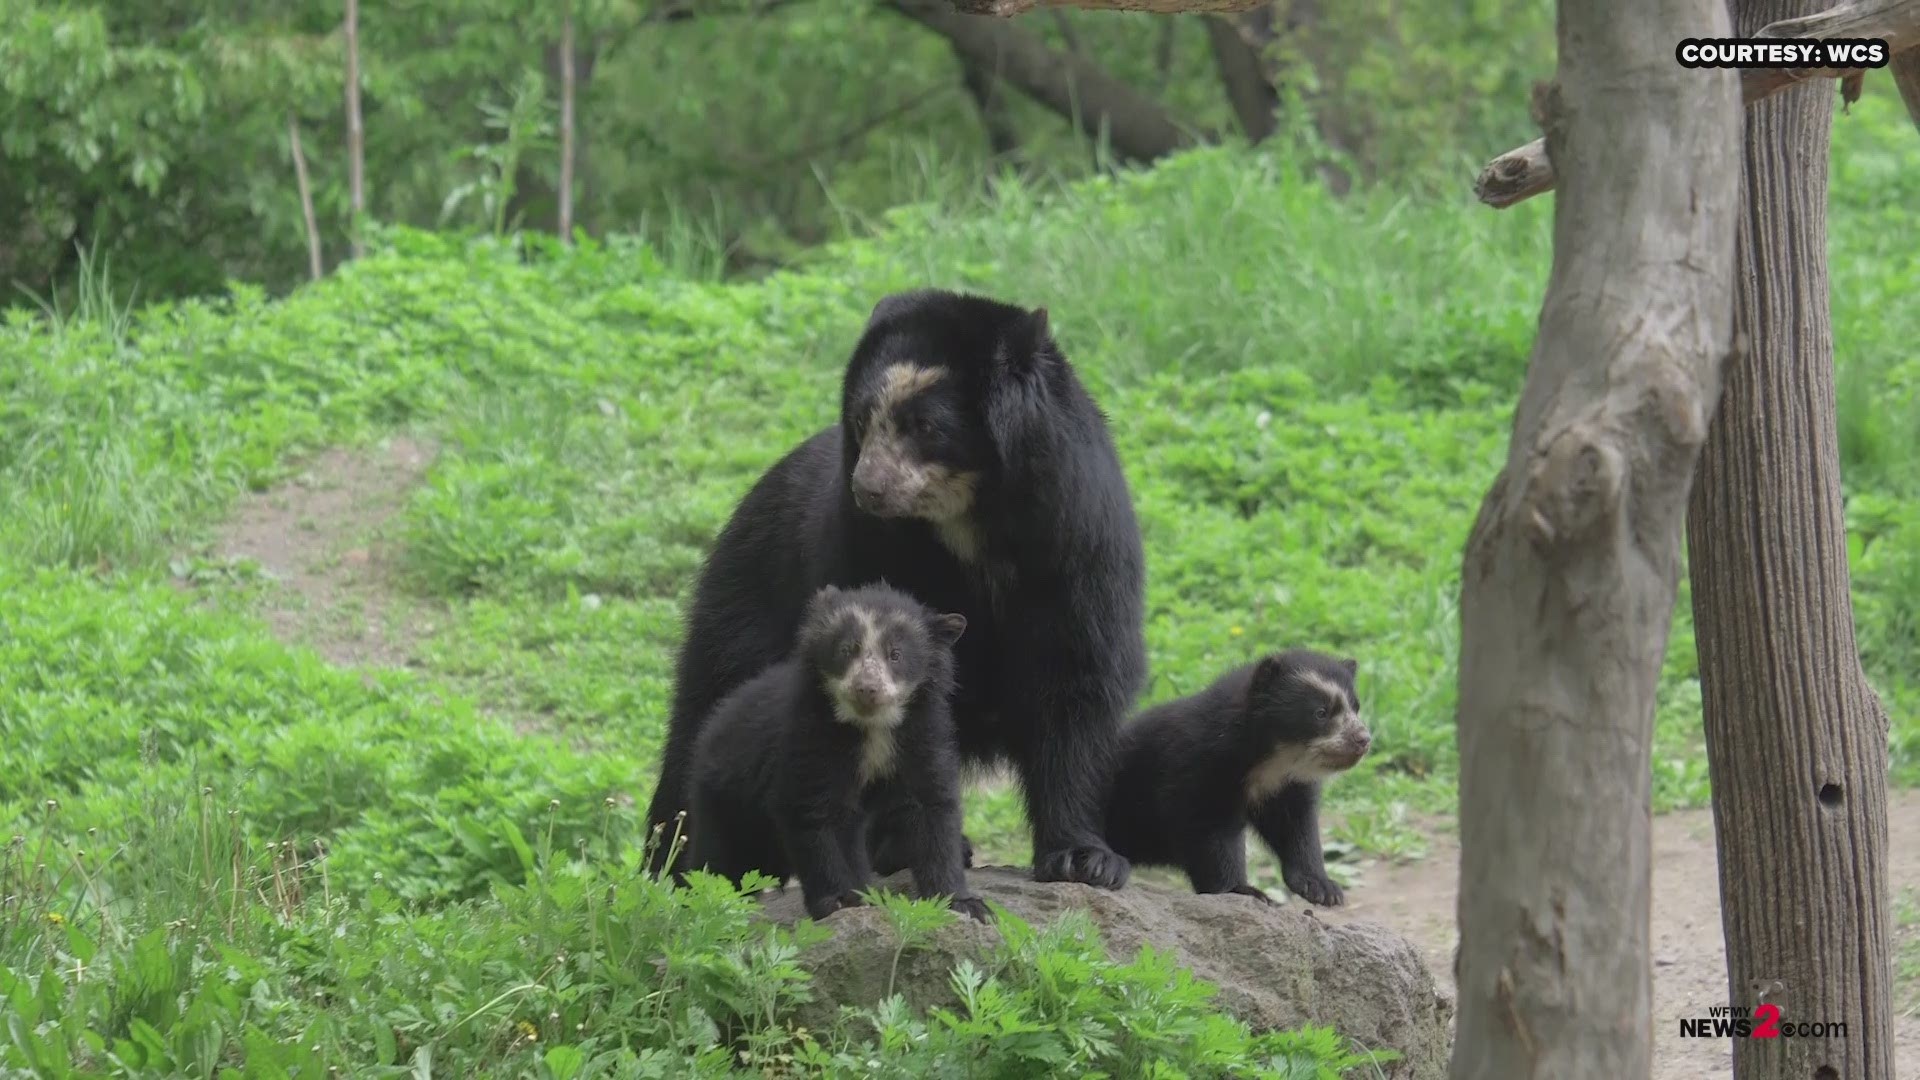 The rare Andean bear cubs named Brienne and Benny just made their debut at the Queens Zoo in New York City. The cubs were born in January to their mother, Nicole and father, Bouba.